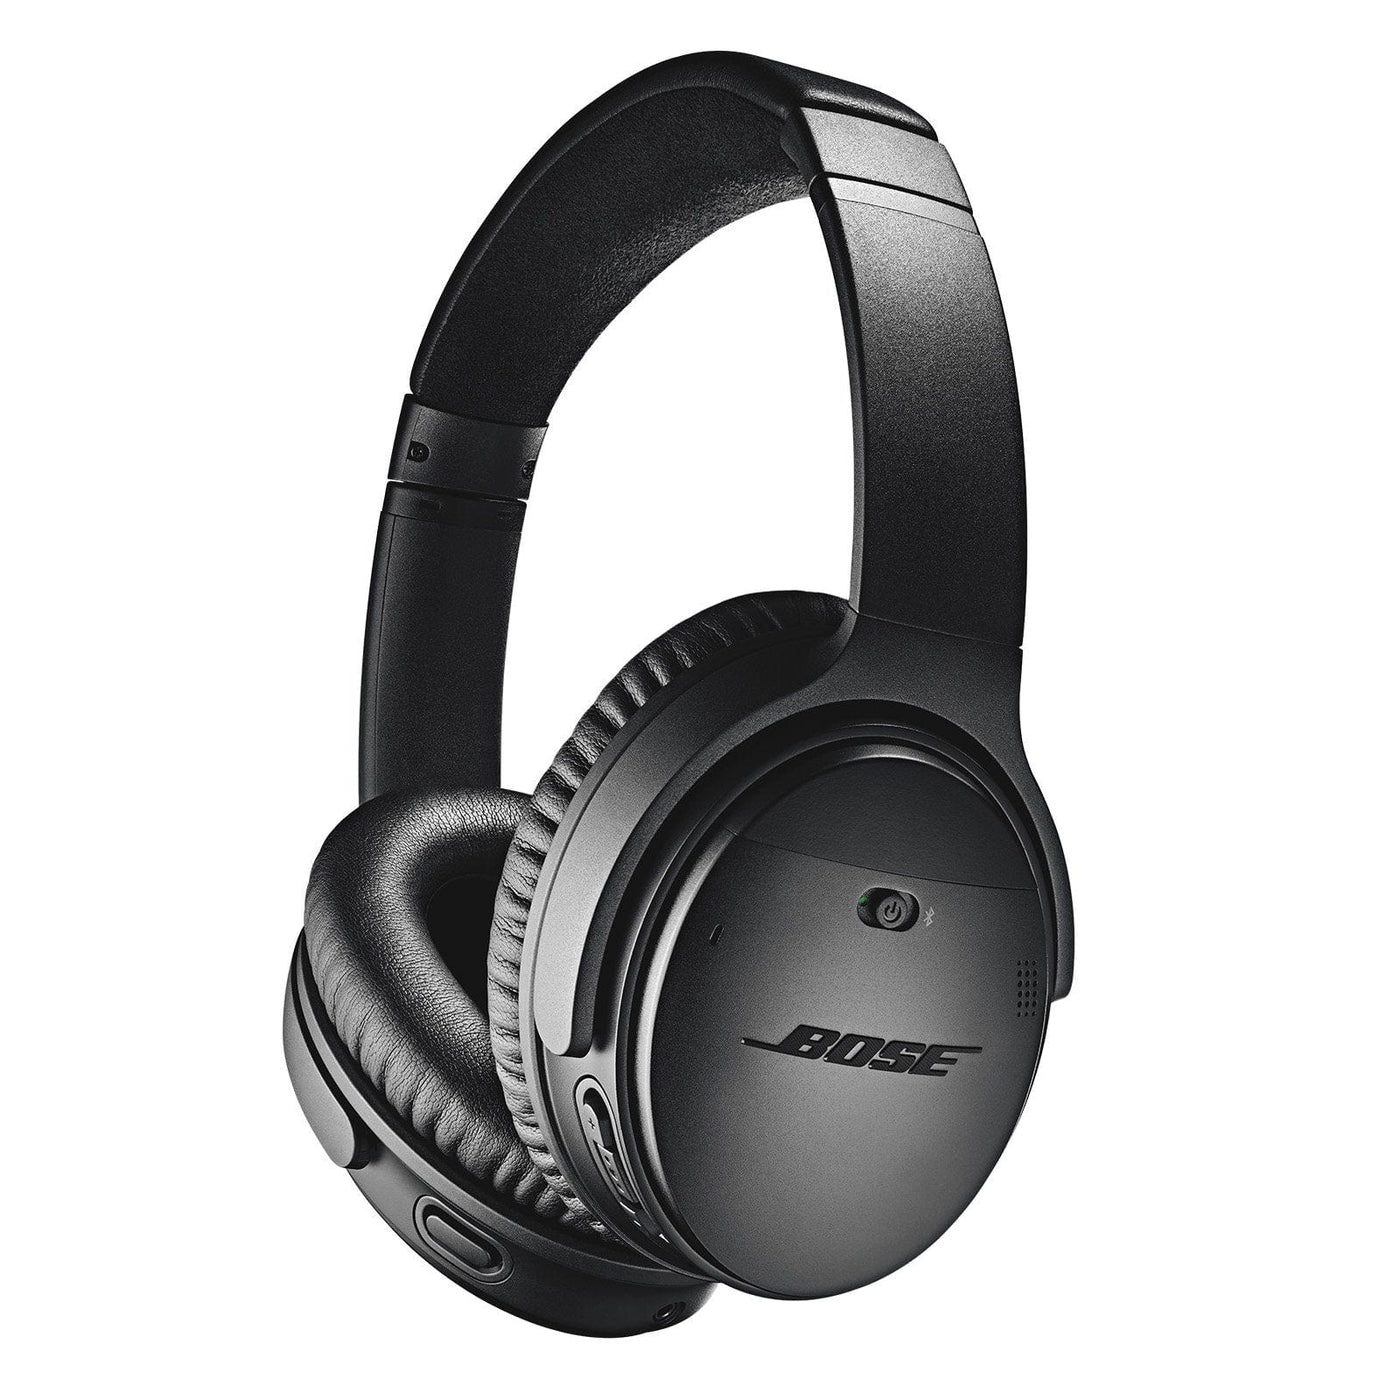 Bose Quietcomfort 35 Ii Noise Cancelling Bluetooth Wireless Over Ear Headphones With Mic And Alexa Voice Control, Black - Smart Tech Shopping